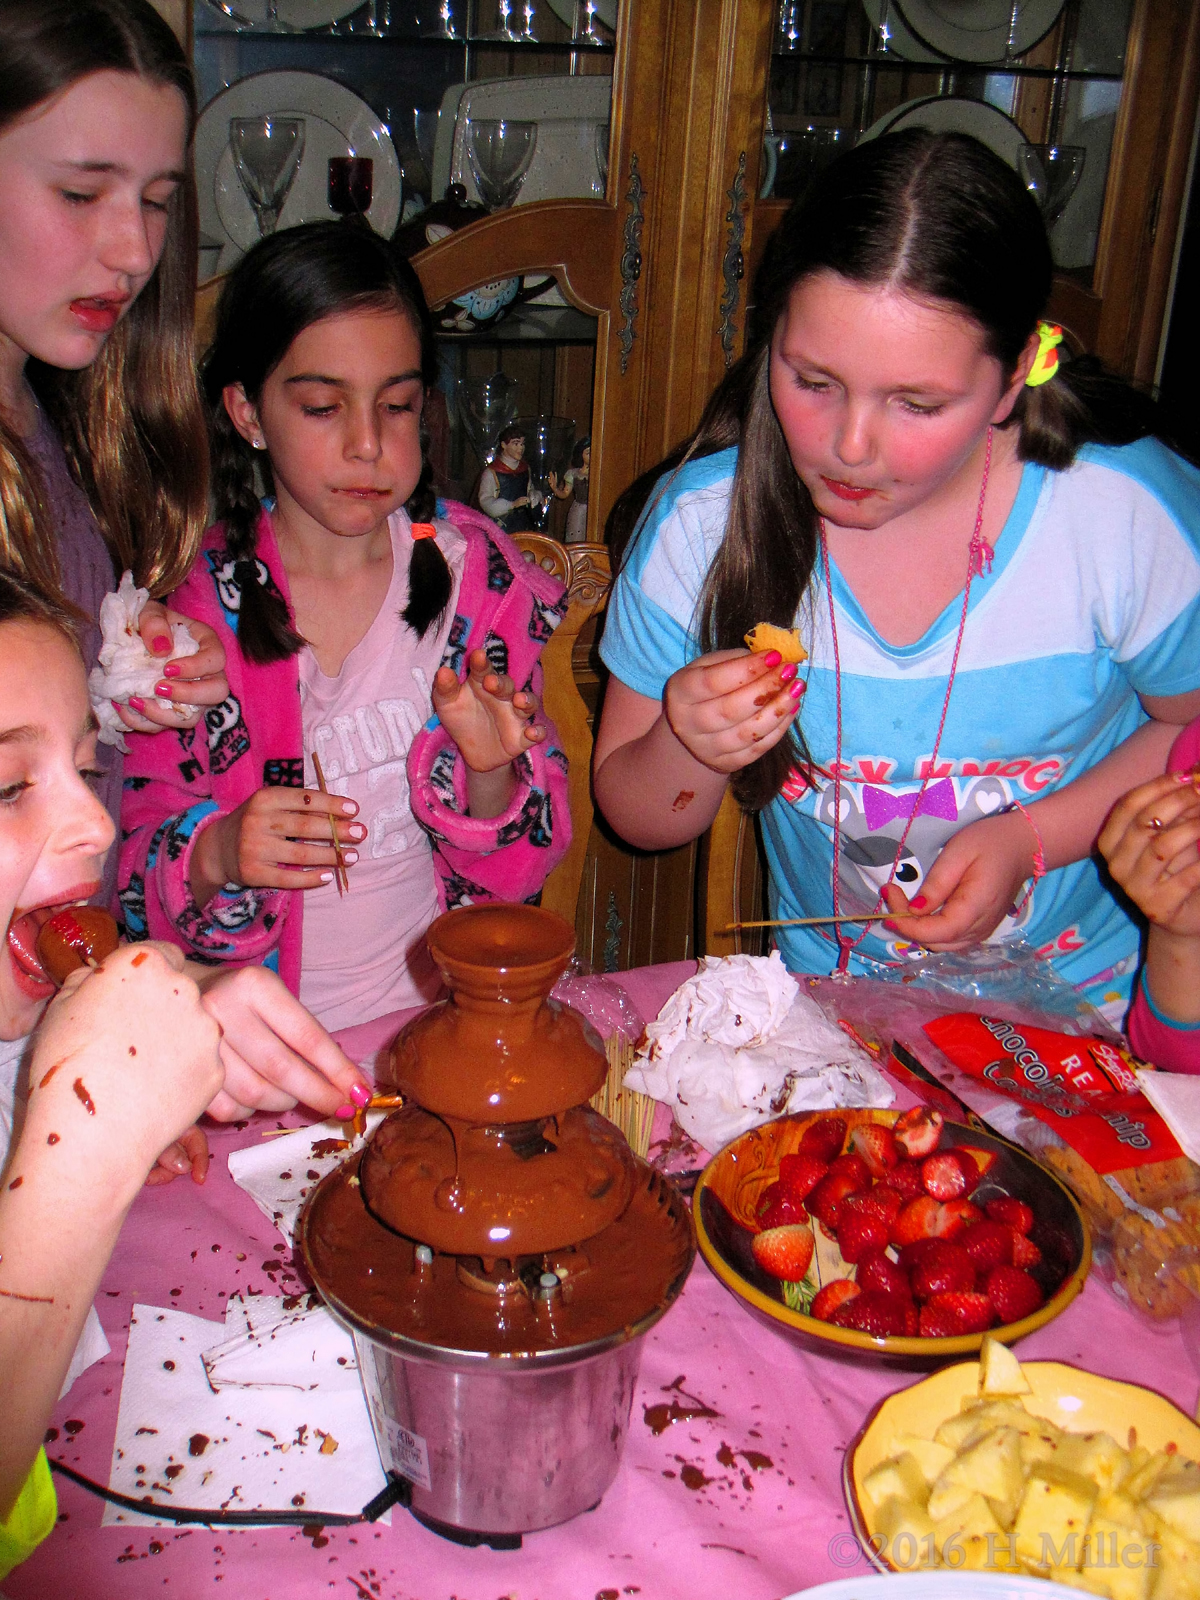 A Picture Capturing The Party Guests Enjoying The Chocolate Fondue Fountain And Snacks 